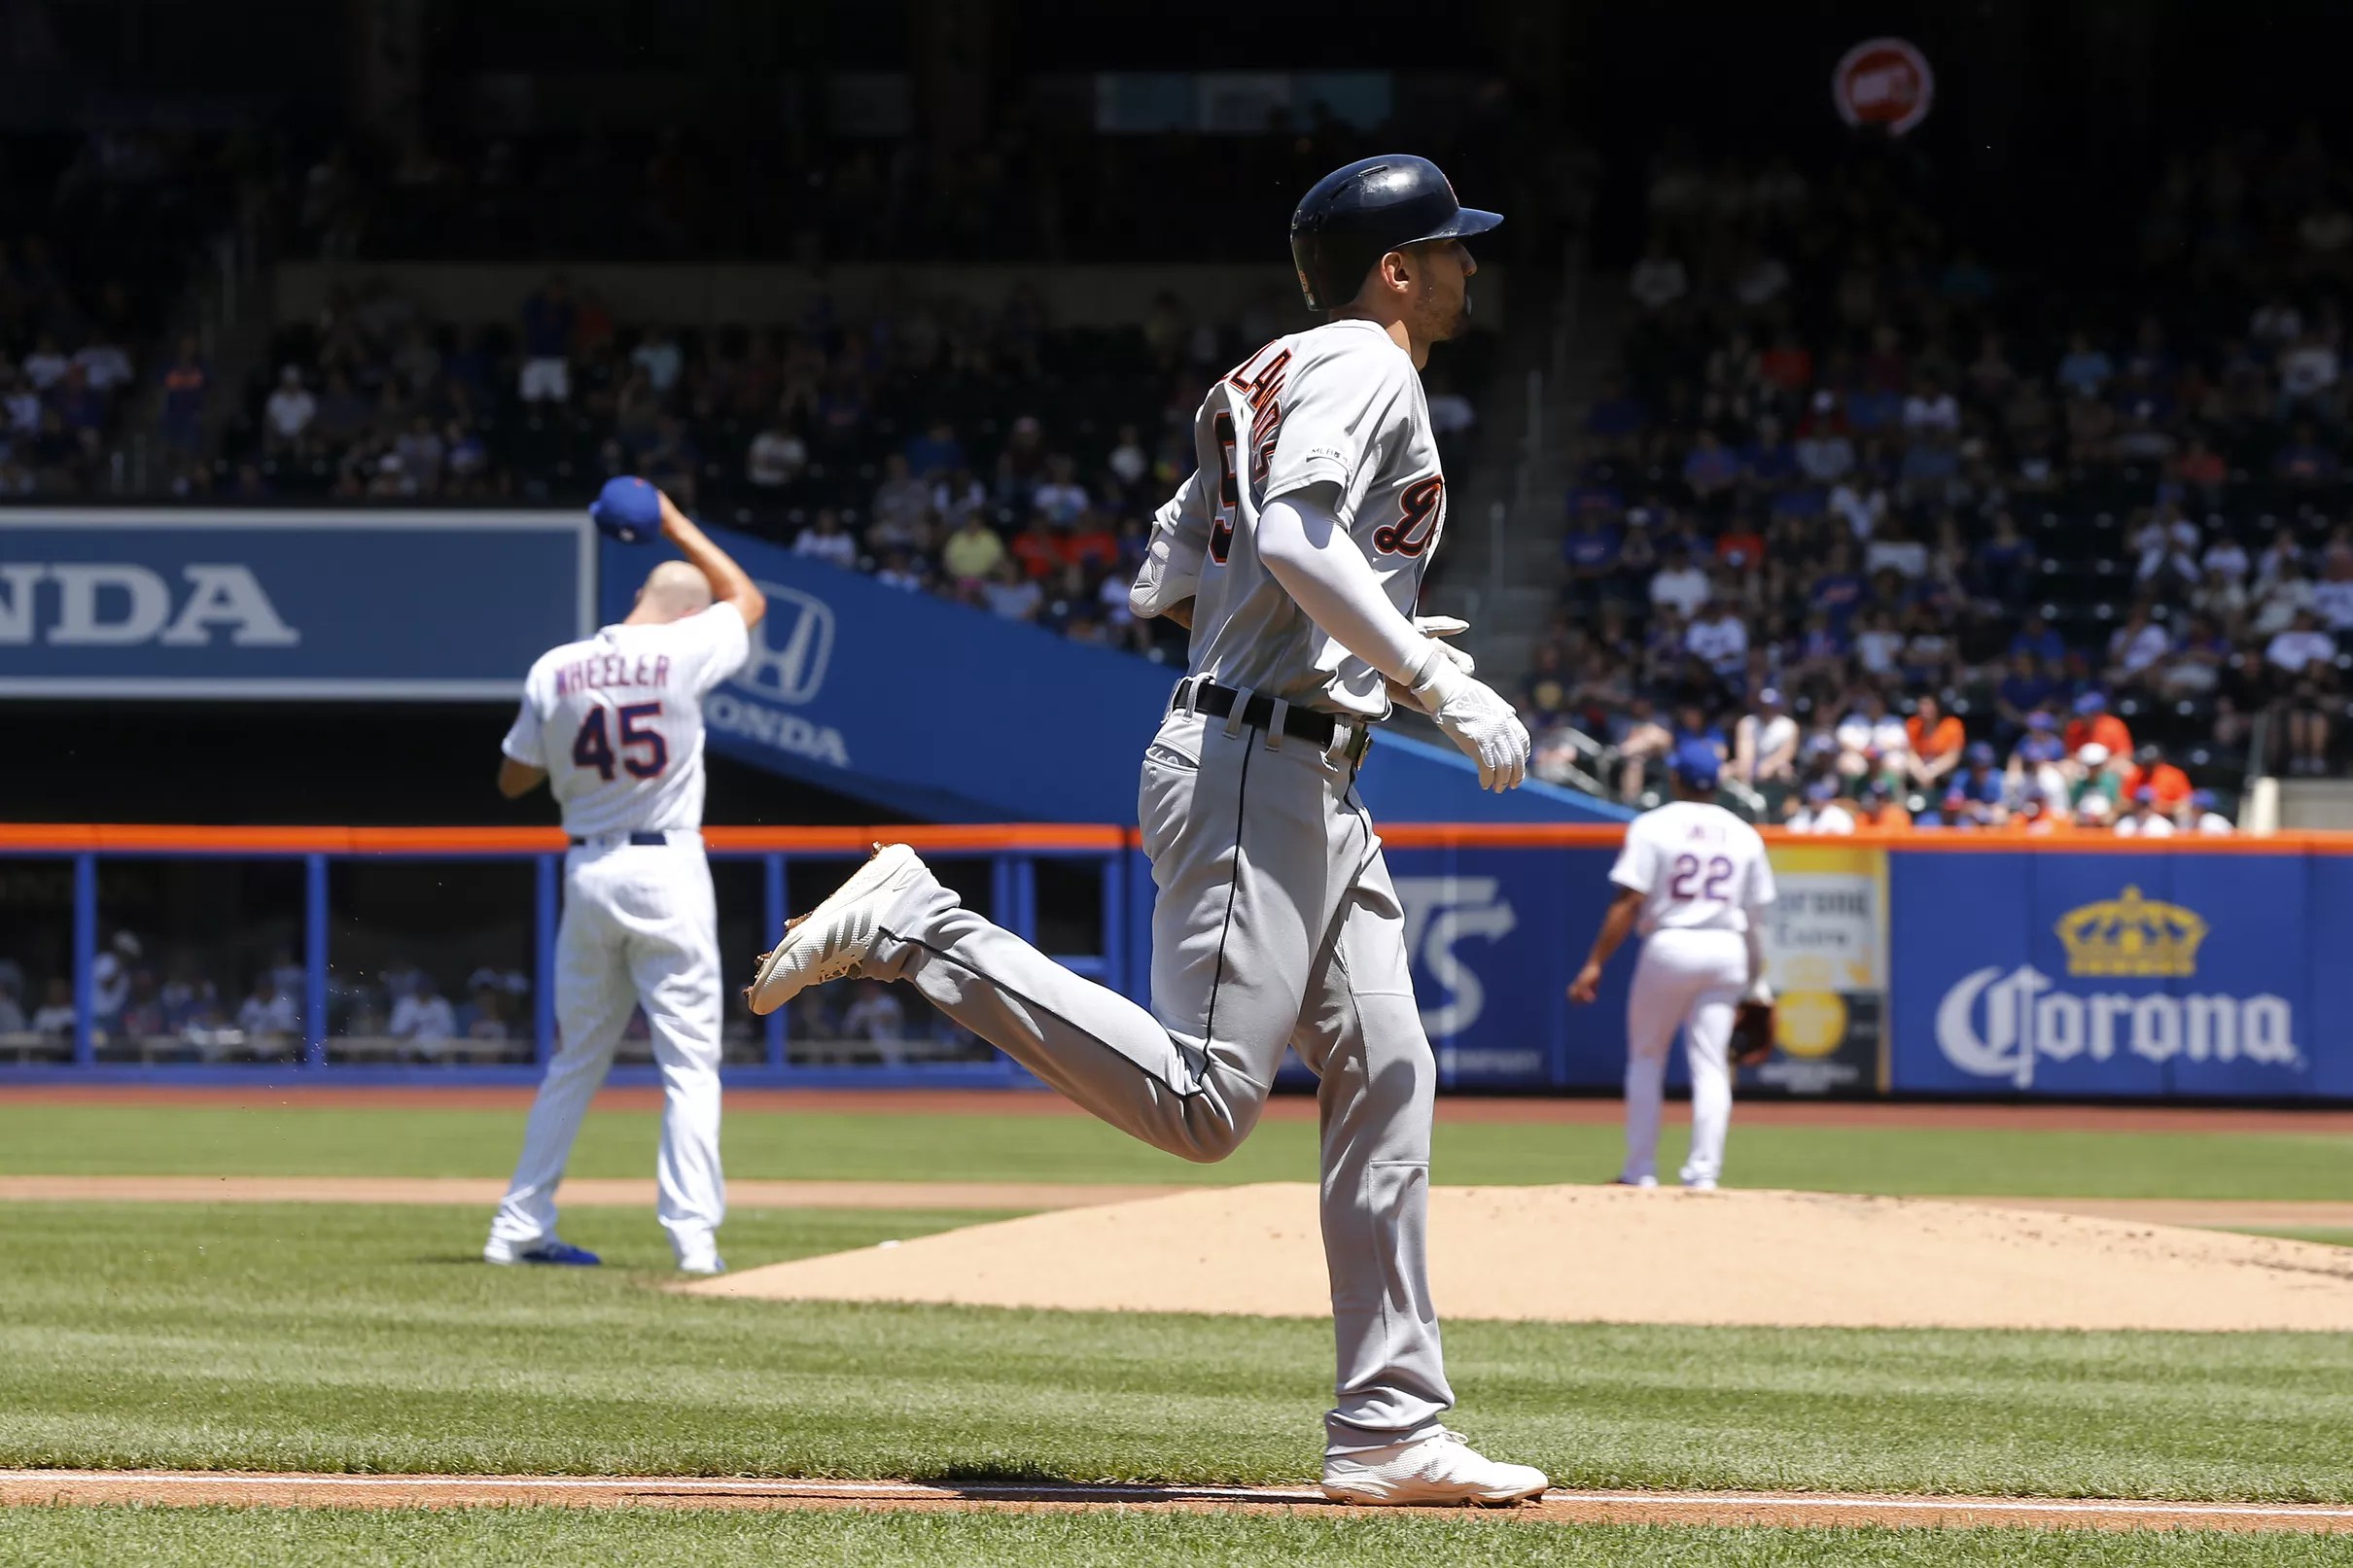 Mets 4, Tigers 3 Tigers can’t rally late, drop series finale